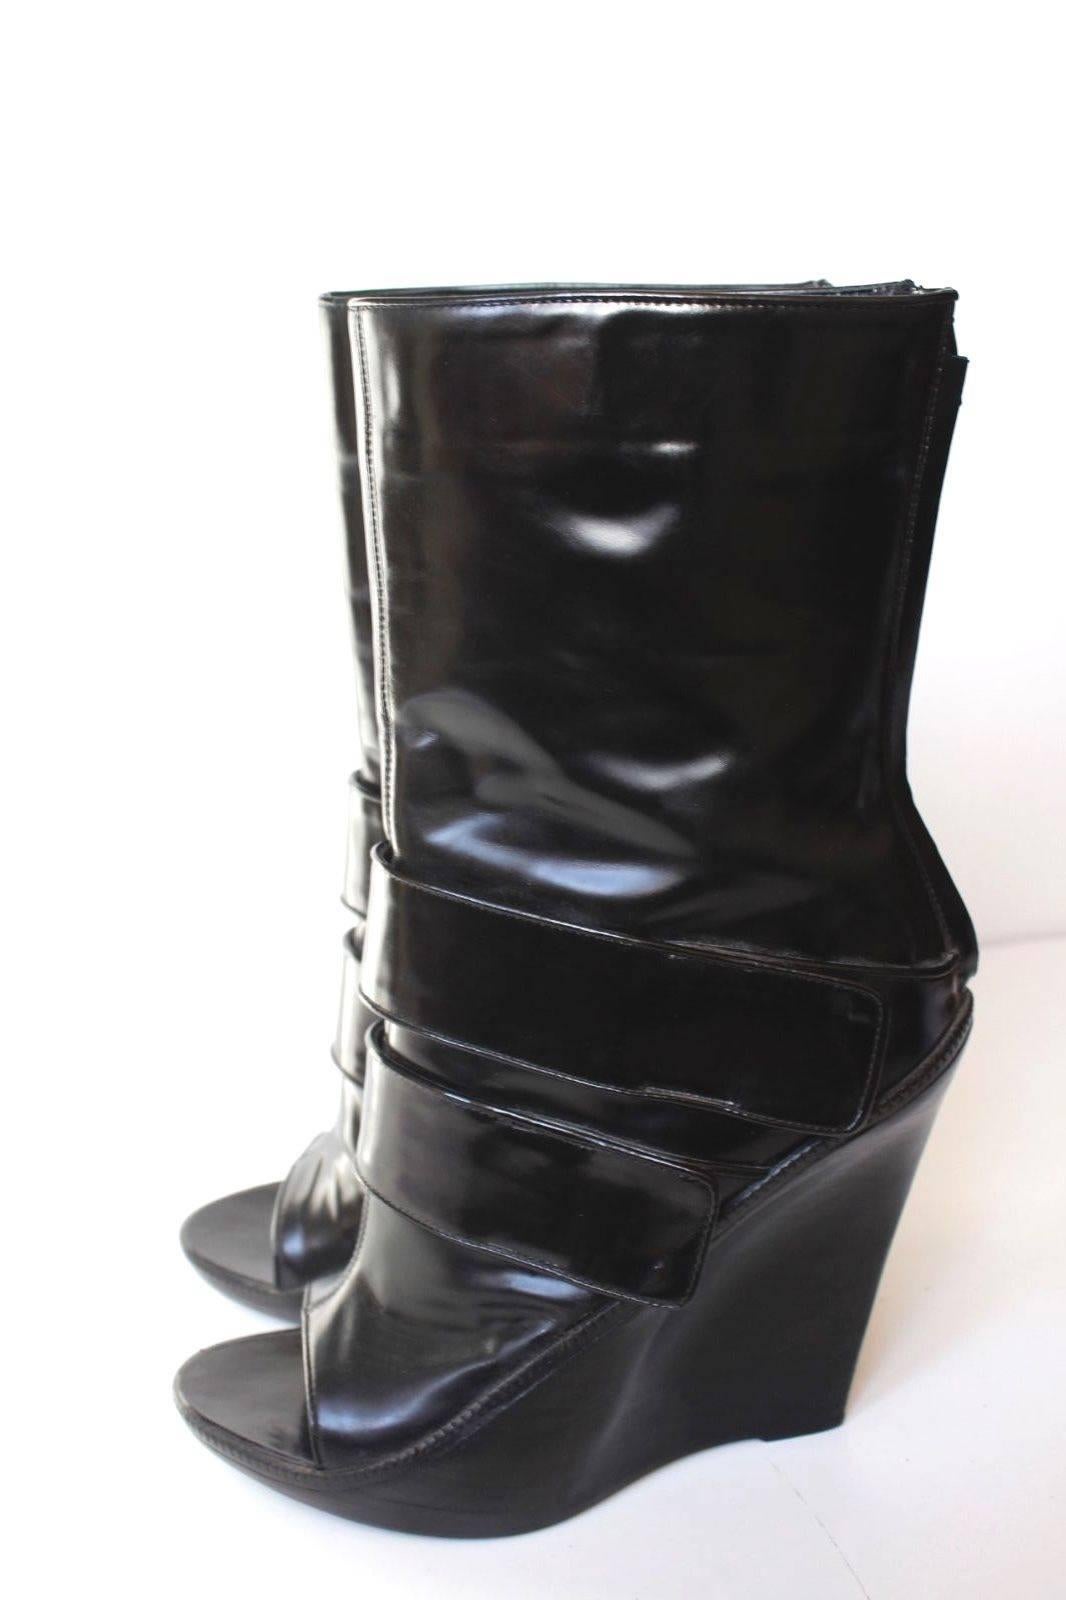 Women's Givenchy Black Patent Leather Wedge Midi Boots 40.5 uk 7.5  For Sale